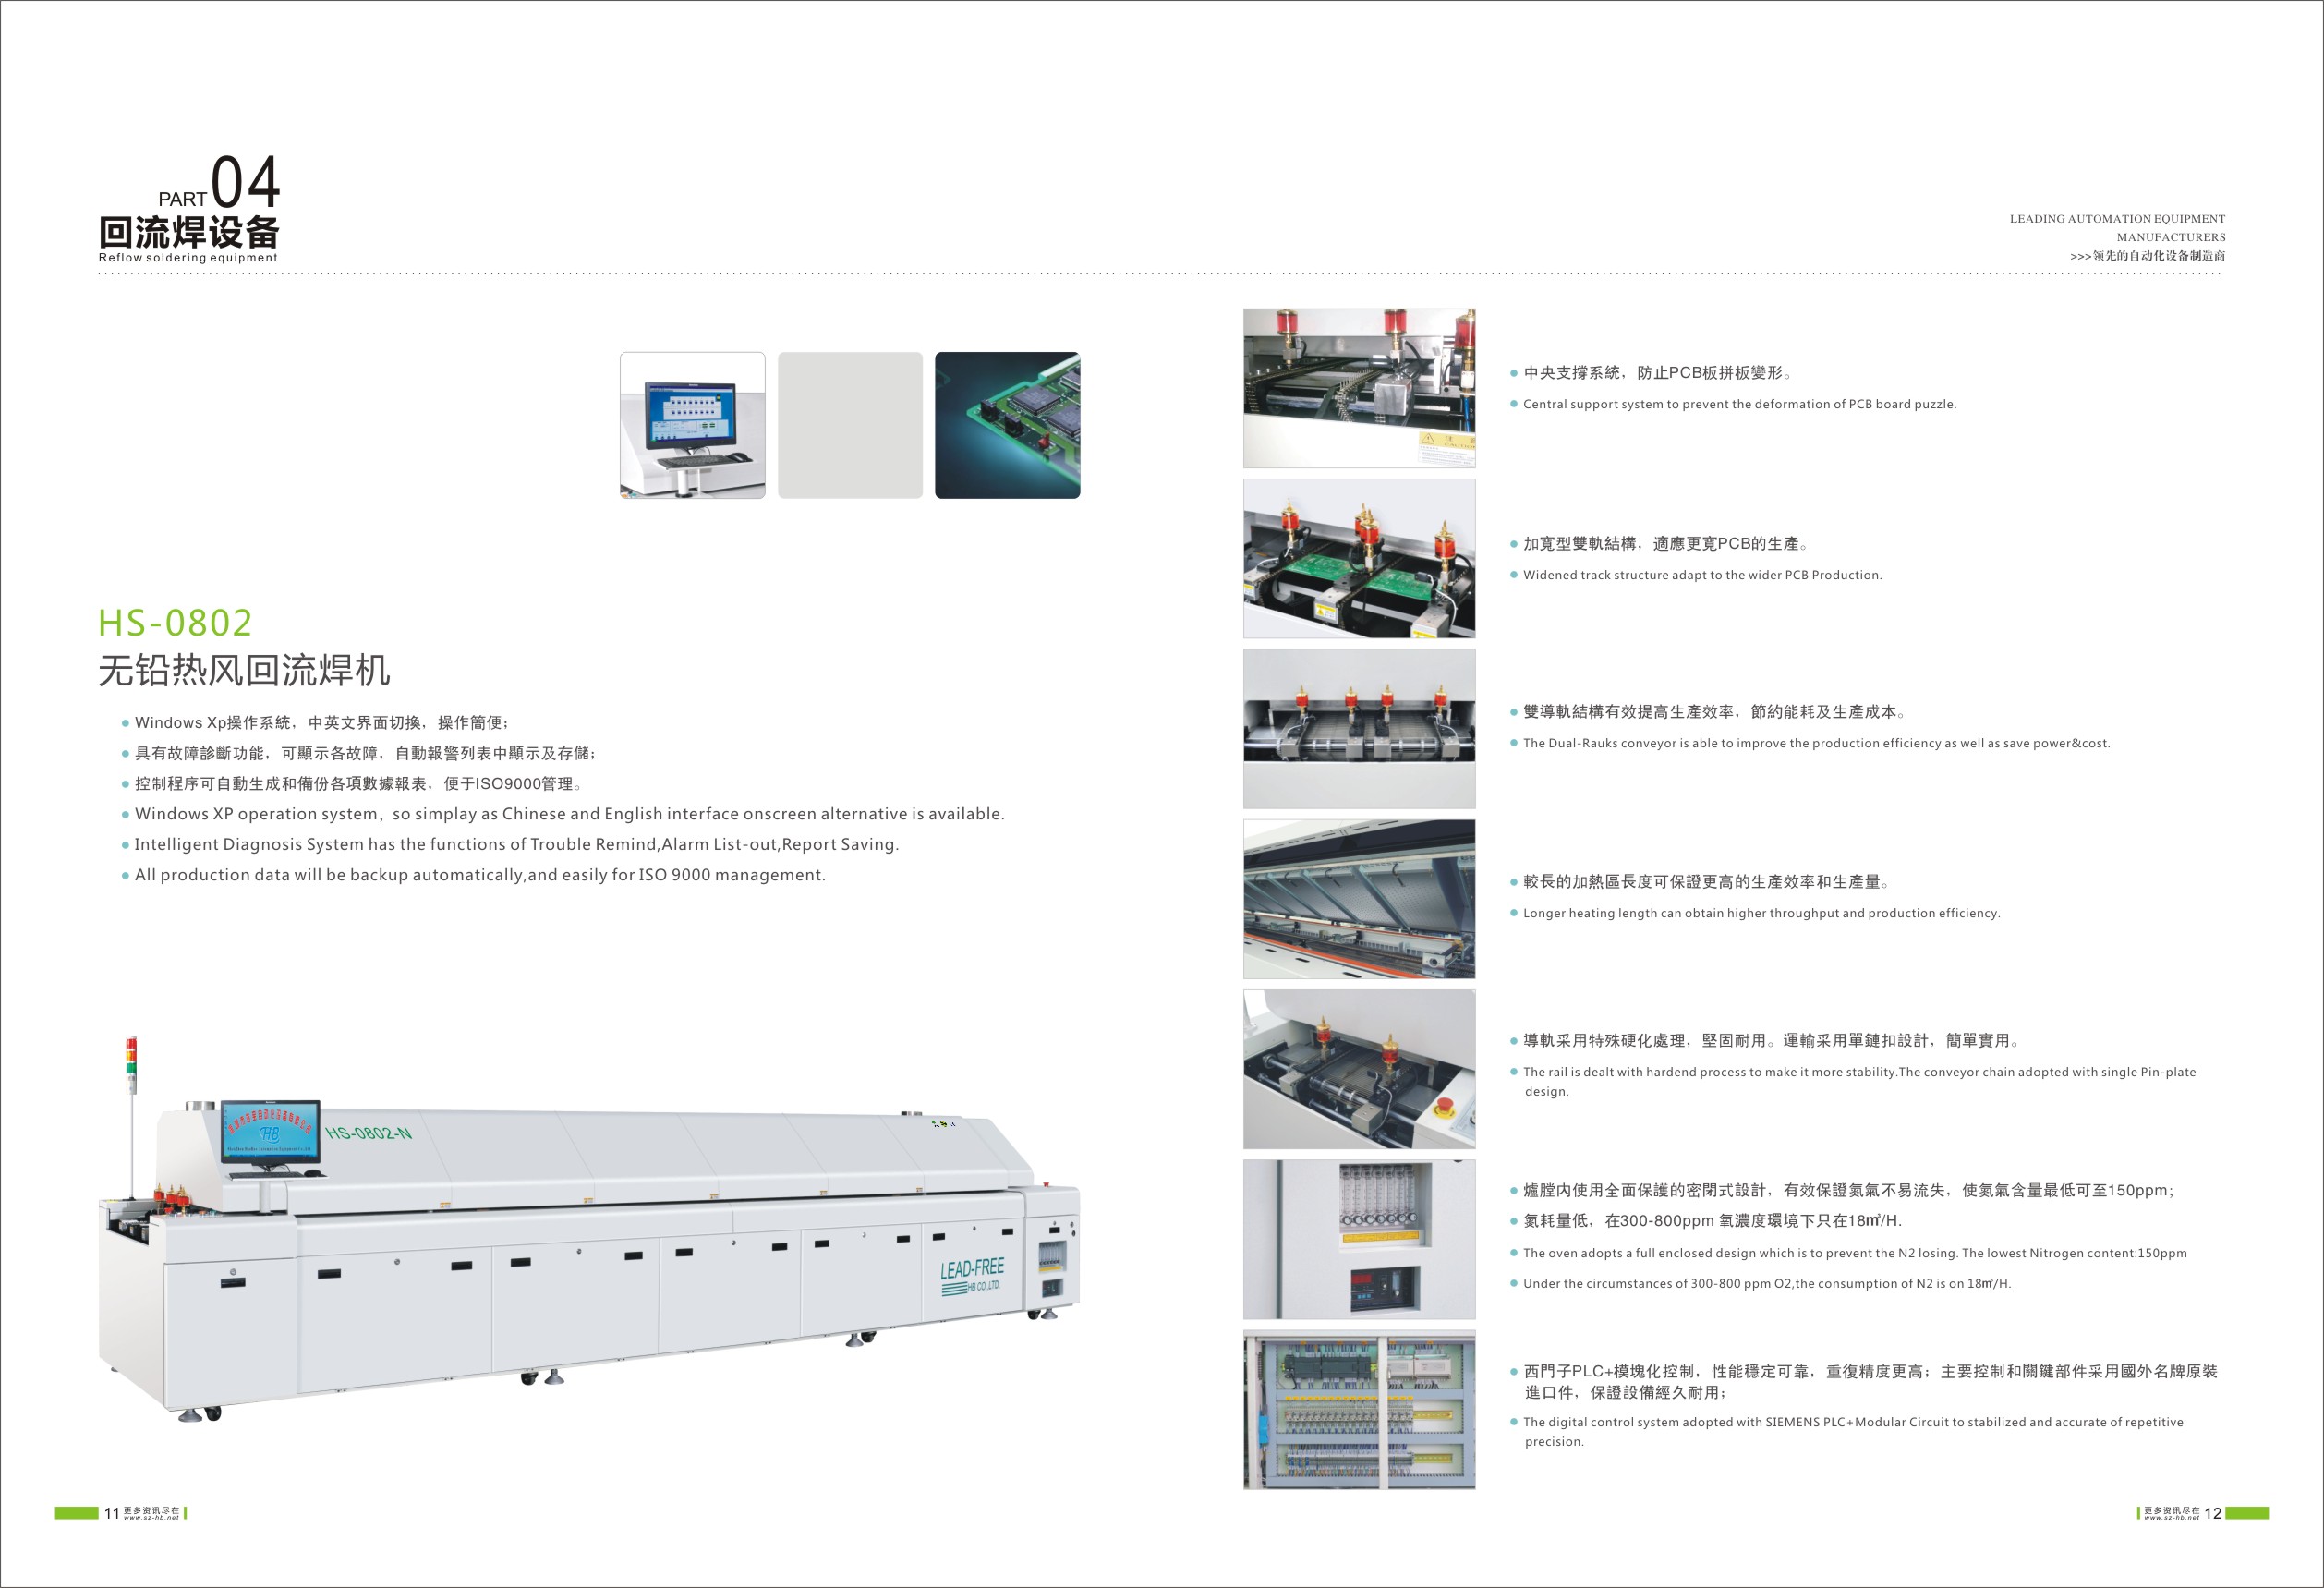 I.C.T-L12  Customized 12 Zones Reflow Soldering Oven LED Nitrogen Reflow  Oven from China manufacturer - I.C.T SMT Machine